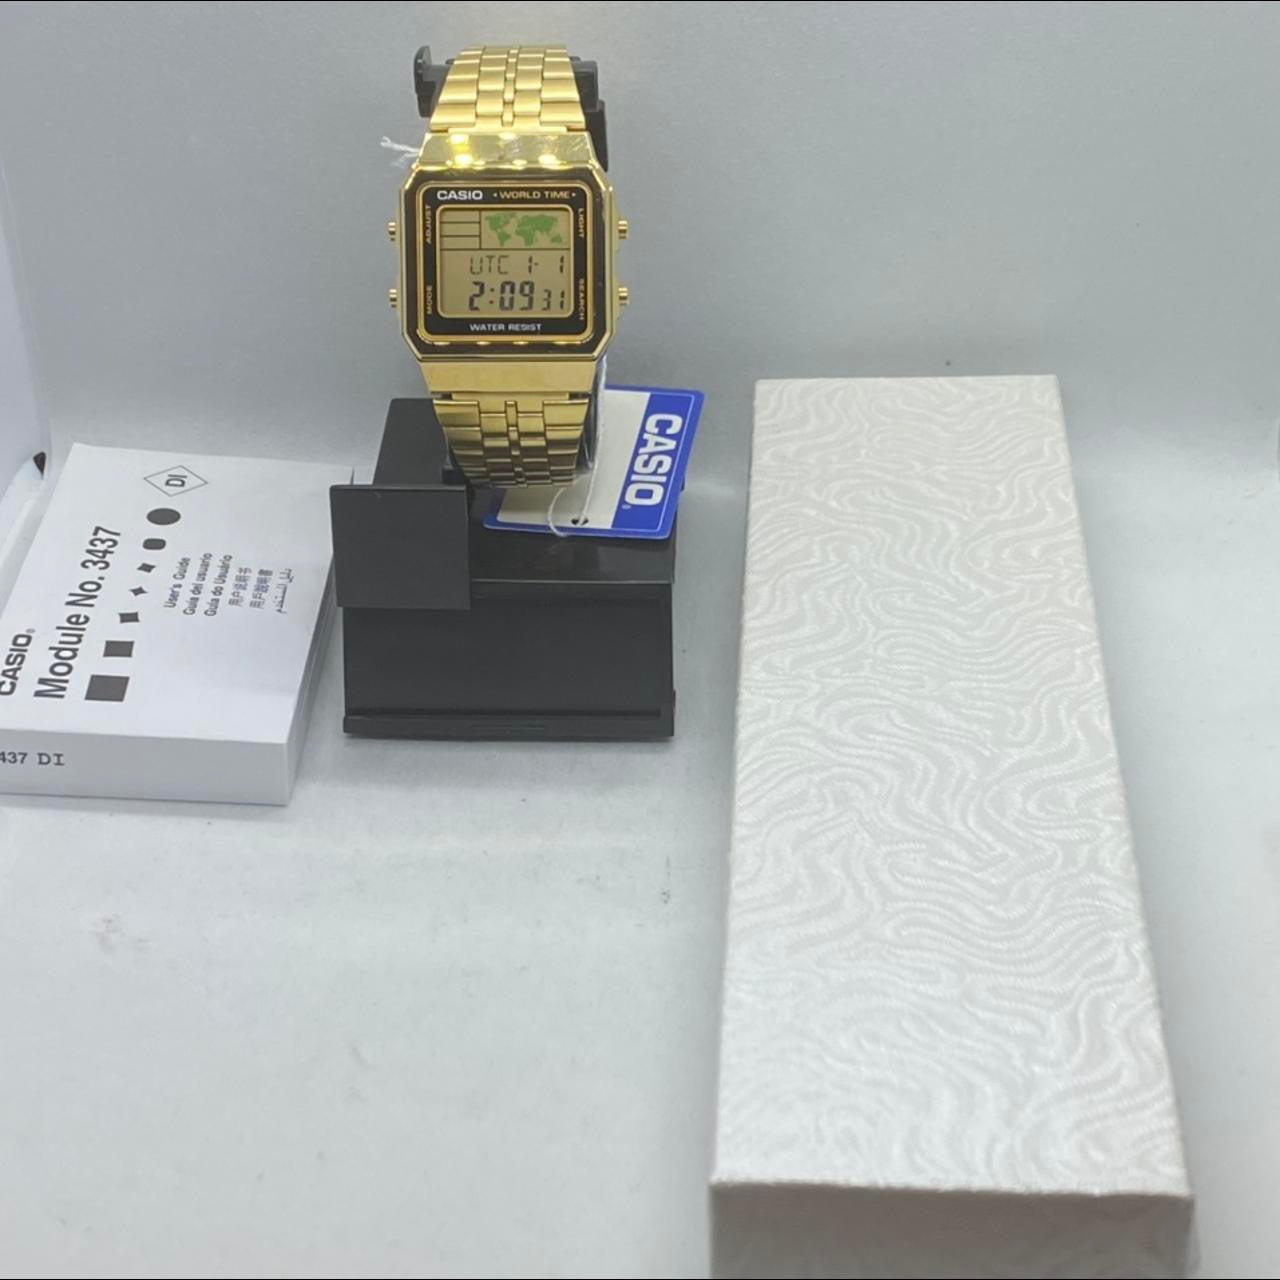 Casio Goldtone Color

 Watch ,

Unisex Wrist Size ,

Adjustable Band

Band Expand up to 8 inches Long,

35 mm Diameter New Item

Stainless Steel

Digital Movement